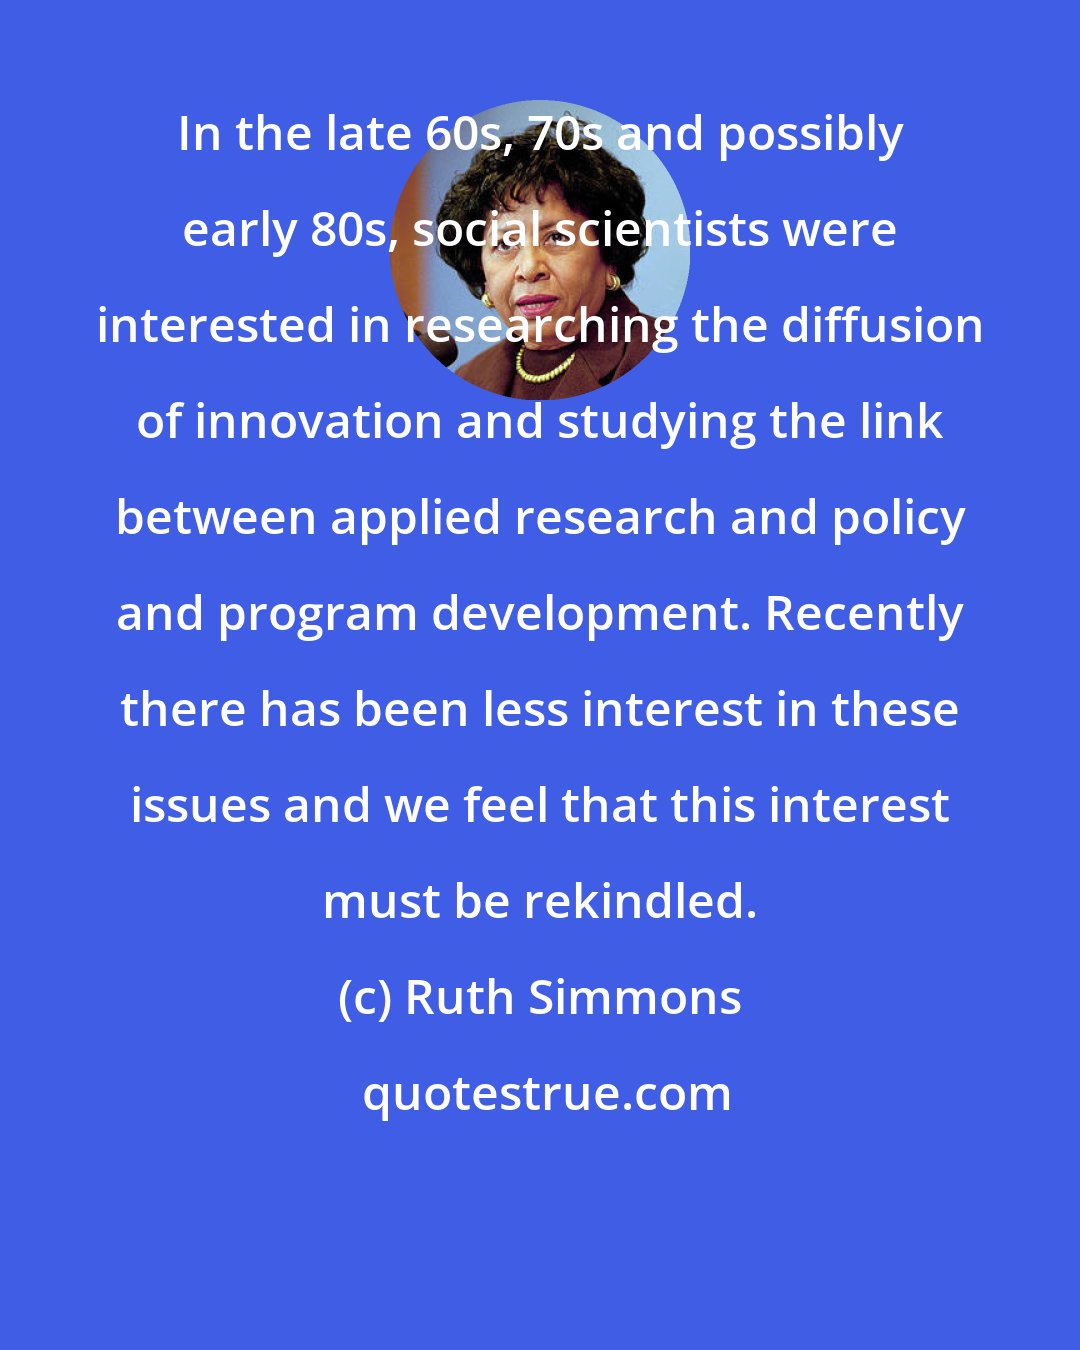 Ruth Simmons: In the late 60s, 70s and possibly early 80s, social scientists were interested in researching the diffusion of innovation and studying the link between applied research and policy and program development. Recently there has been less interest in these issues and we feel that this interest must be rekindled.